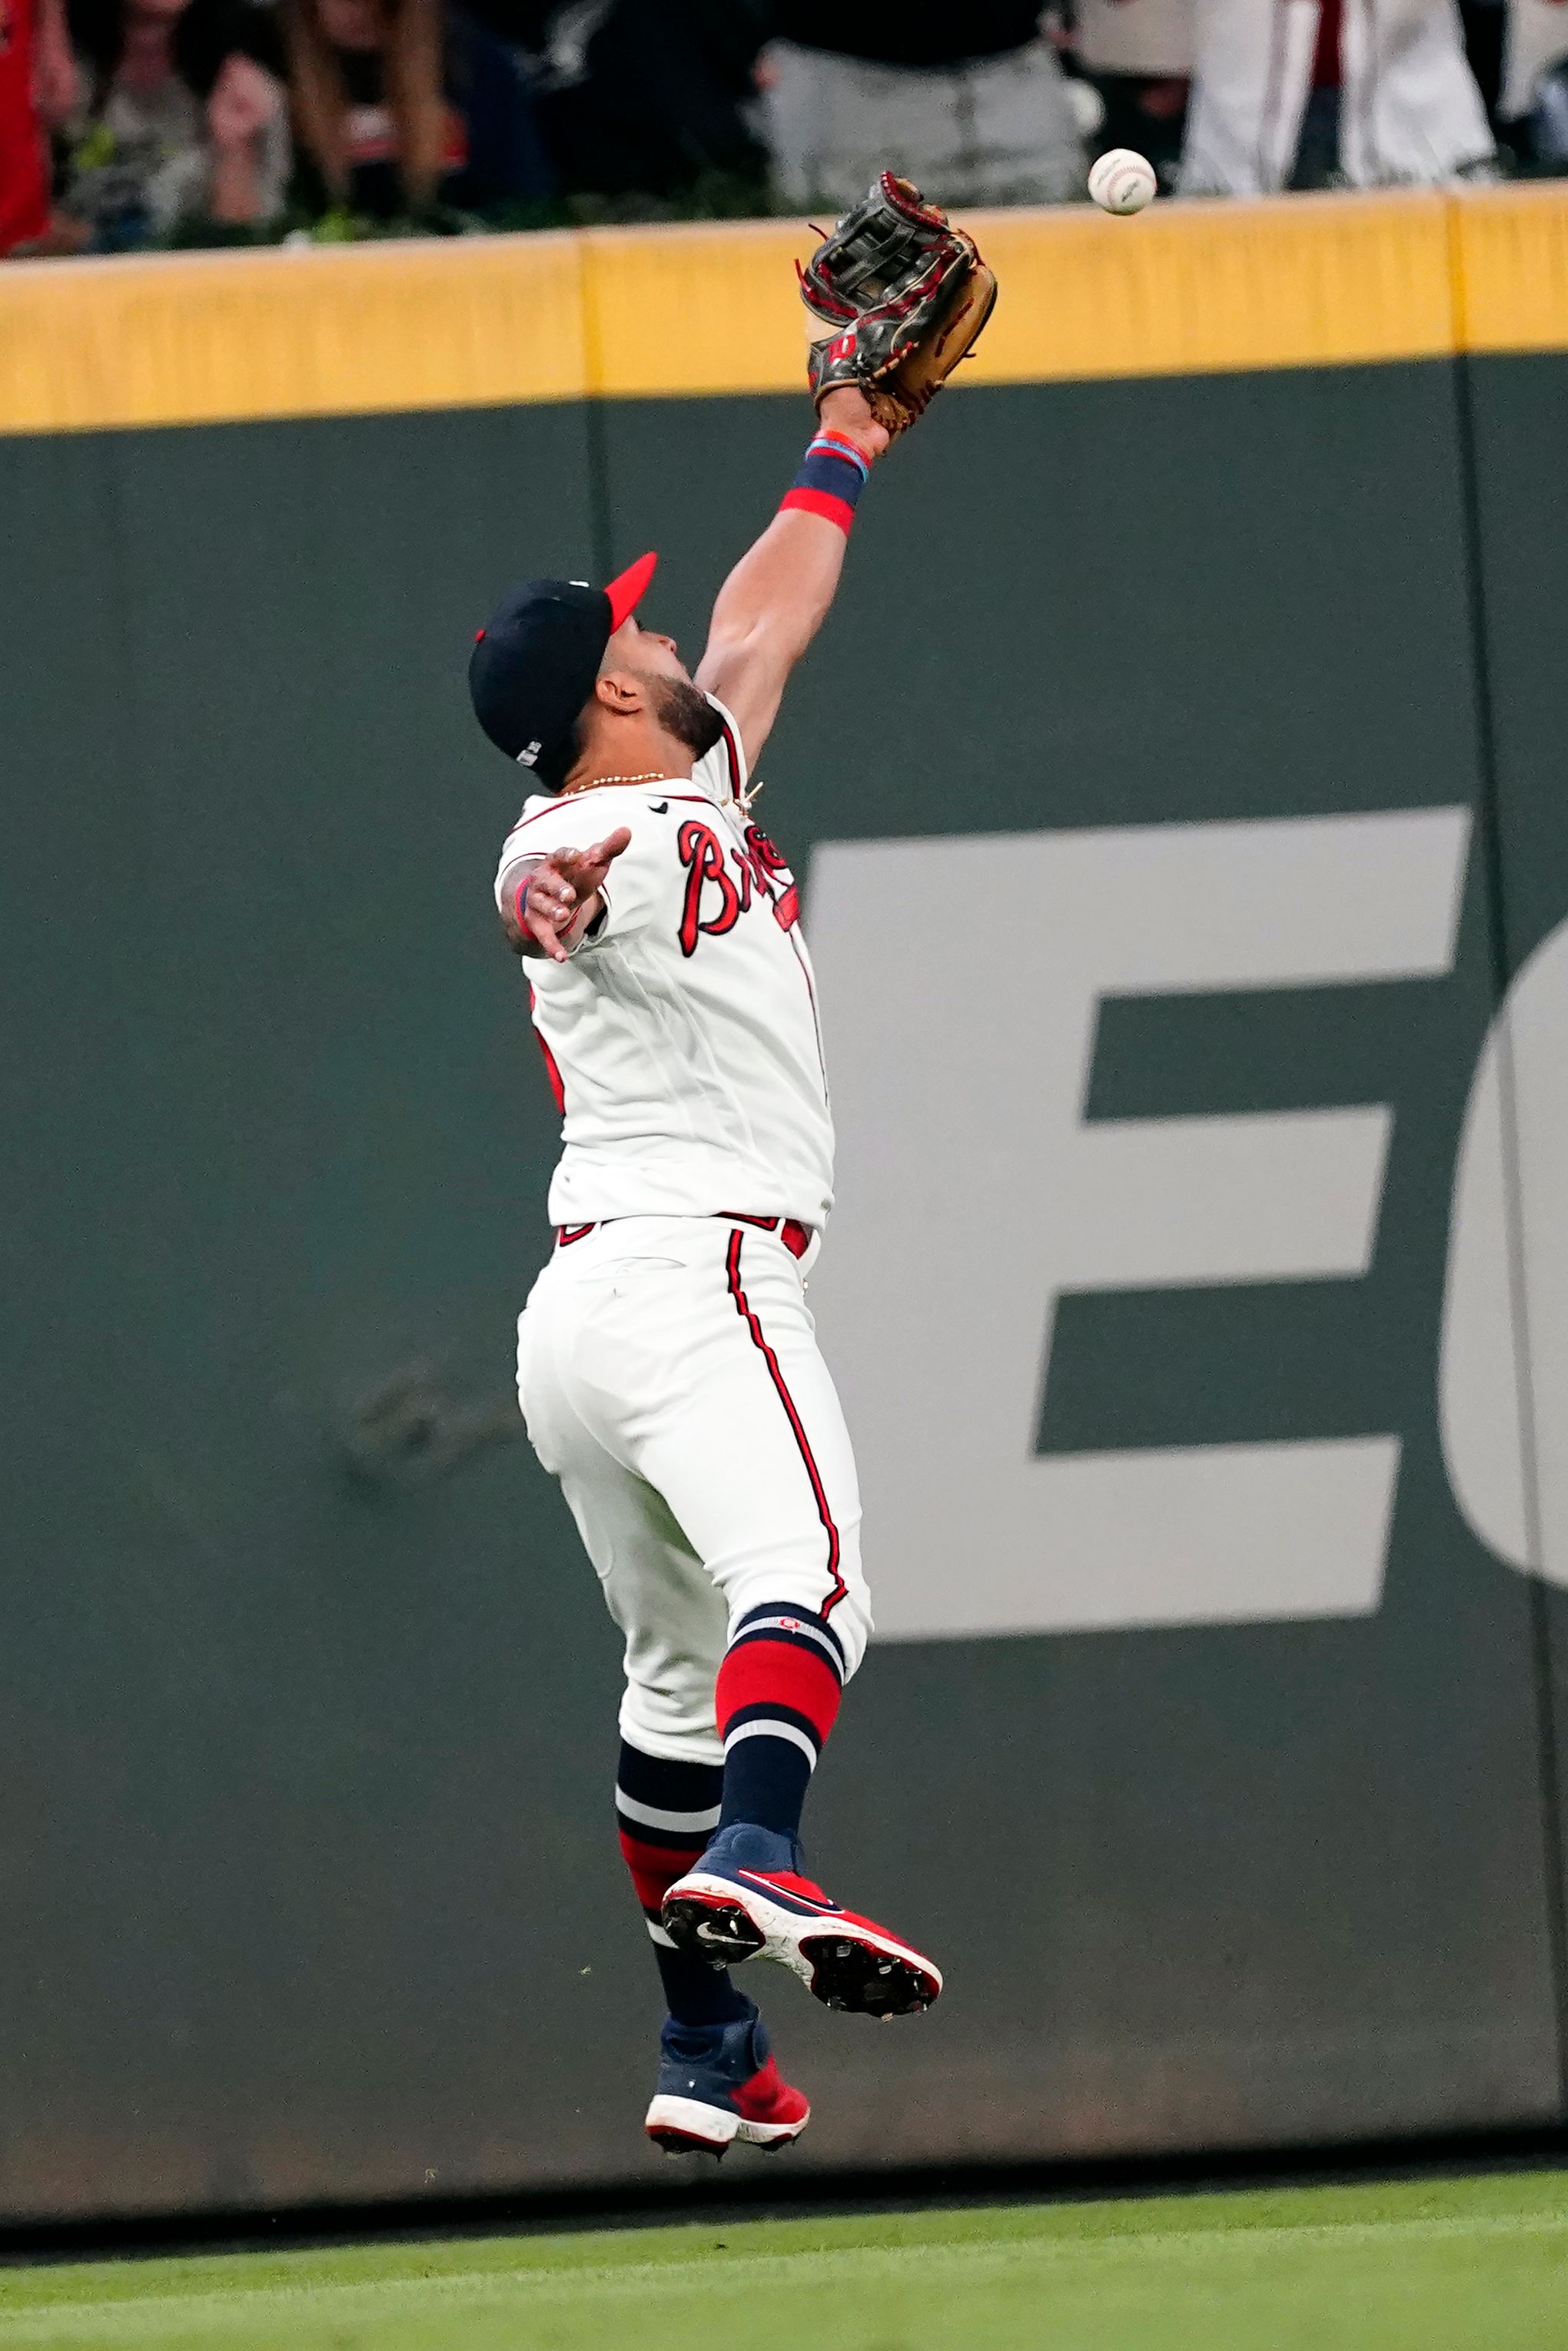 Fried, Riley power Braves past Phils; magic number down to 1